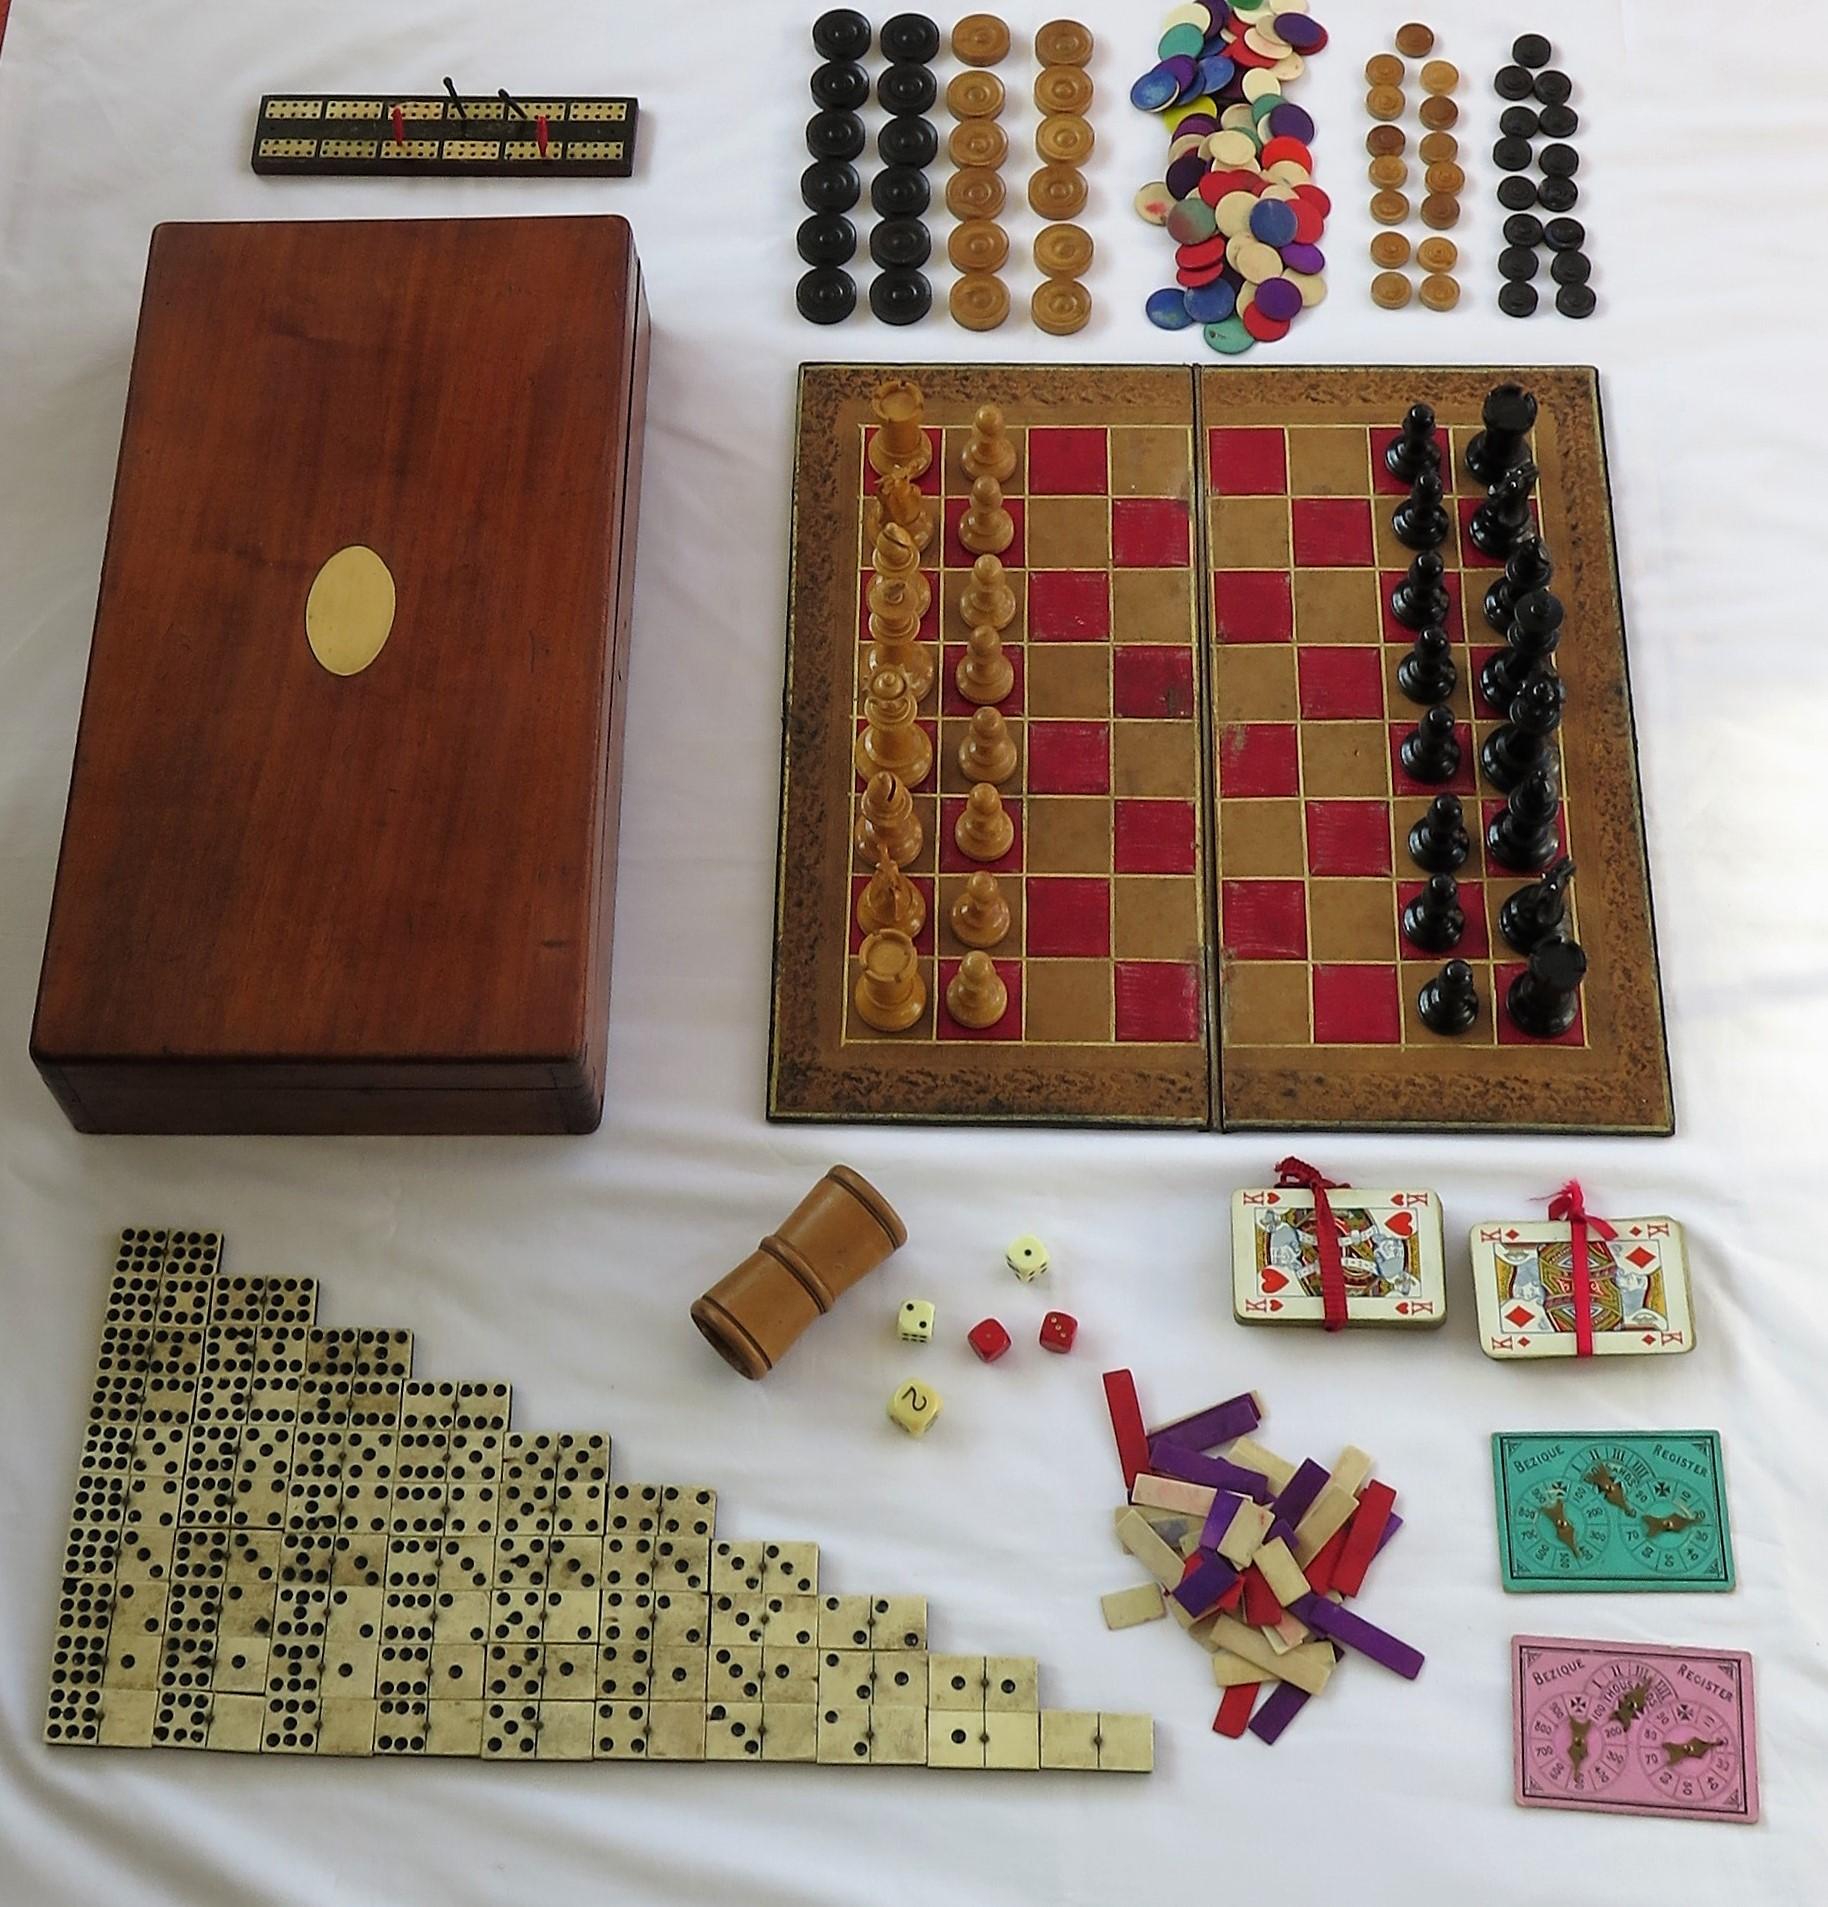 This is a high quality large Games Compendium, complete with many individual games in its original hardwood storage box with a hinged lid.

All the pieces are well made and complete.

The box is very well made of a jointed hardwood, possibly red